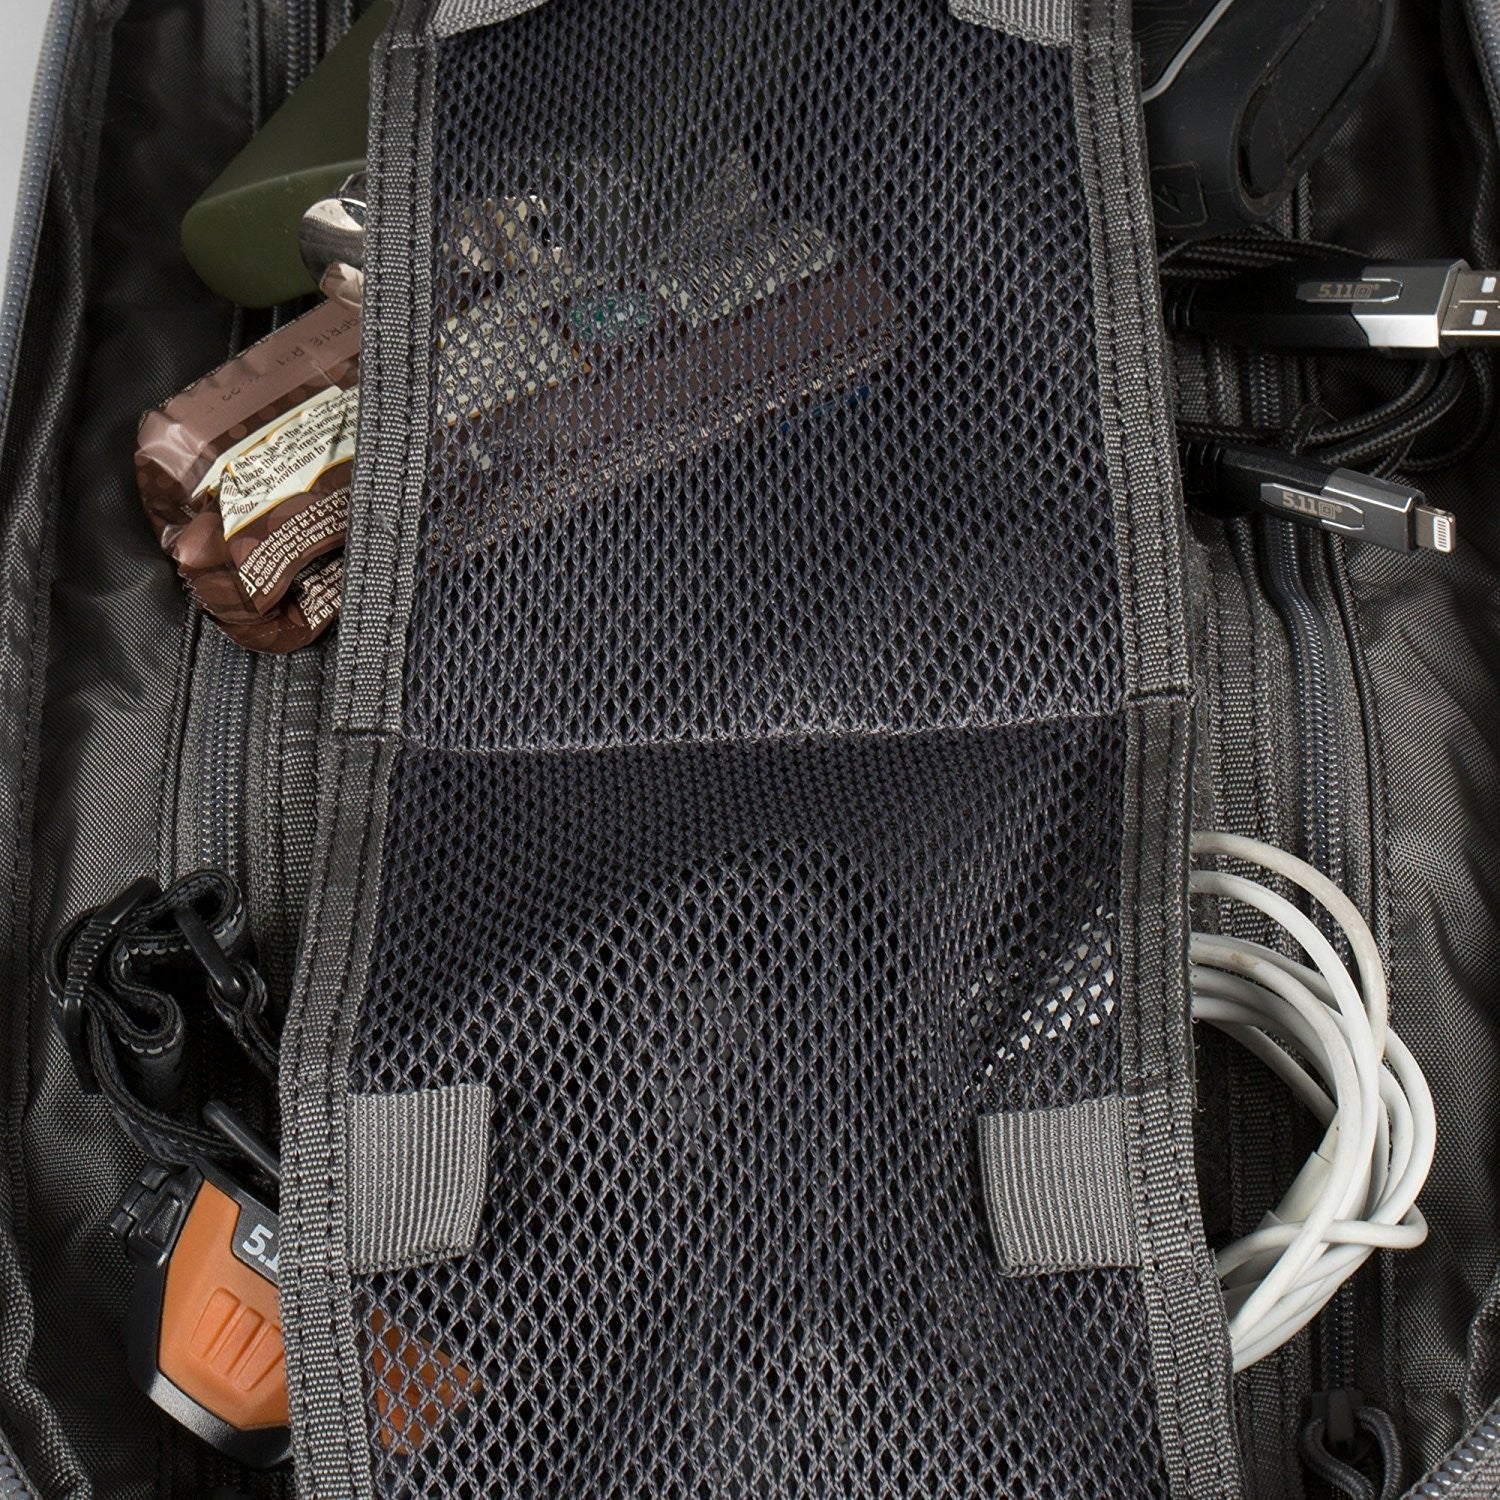 an open suitcase filled with electronics and cords